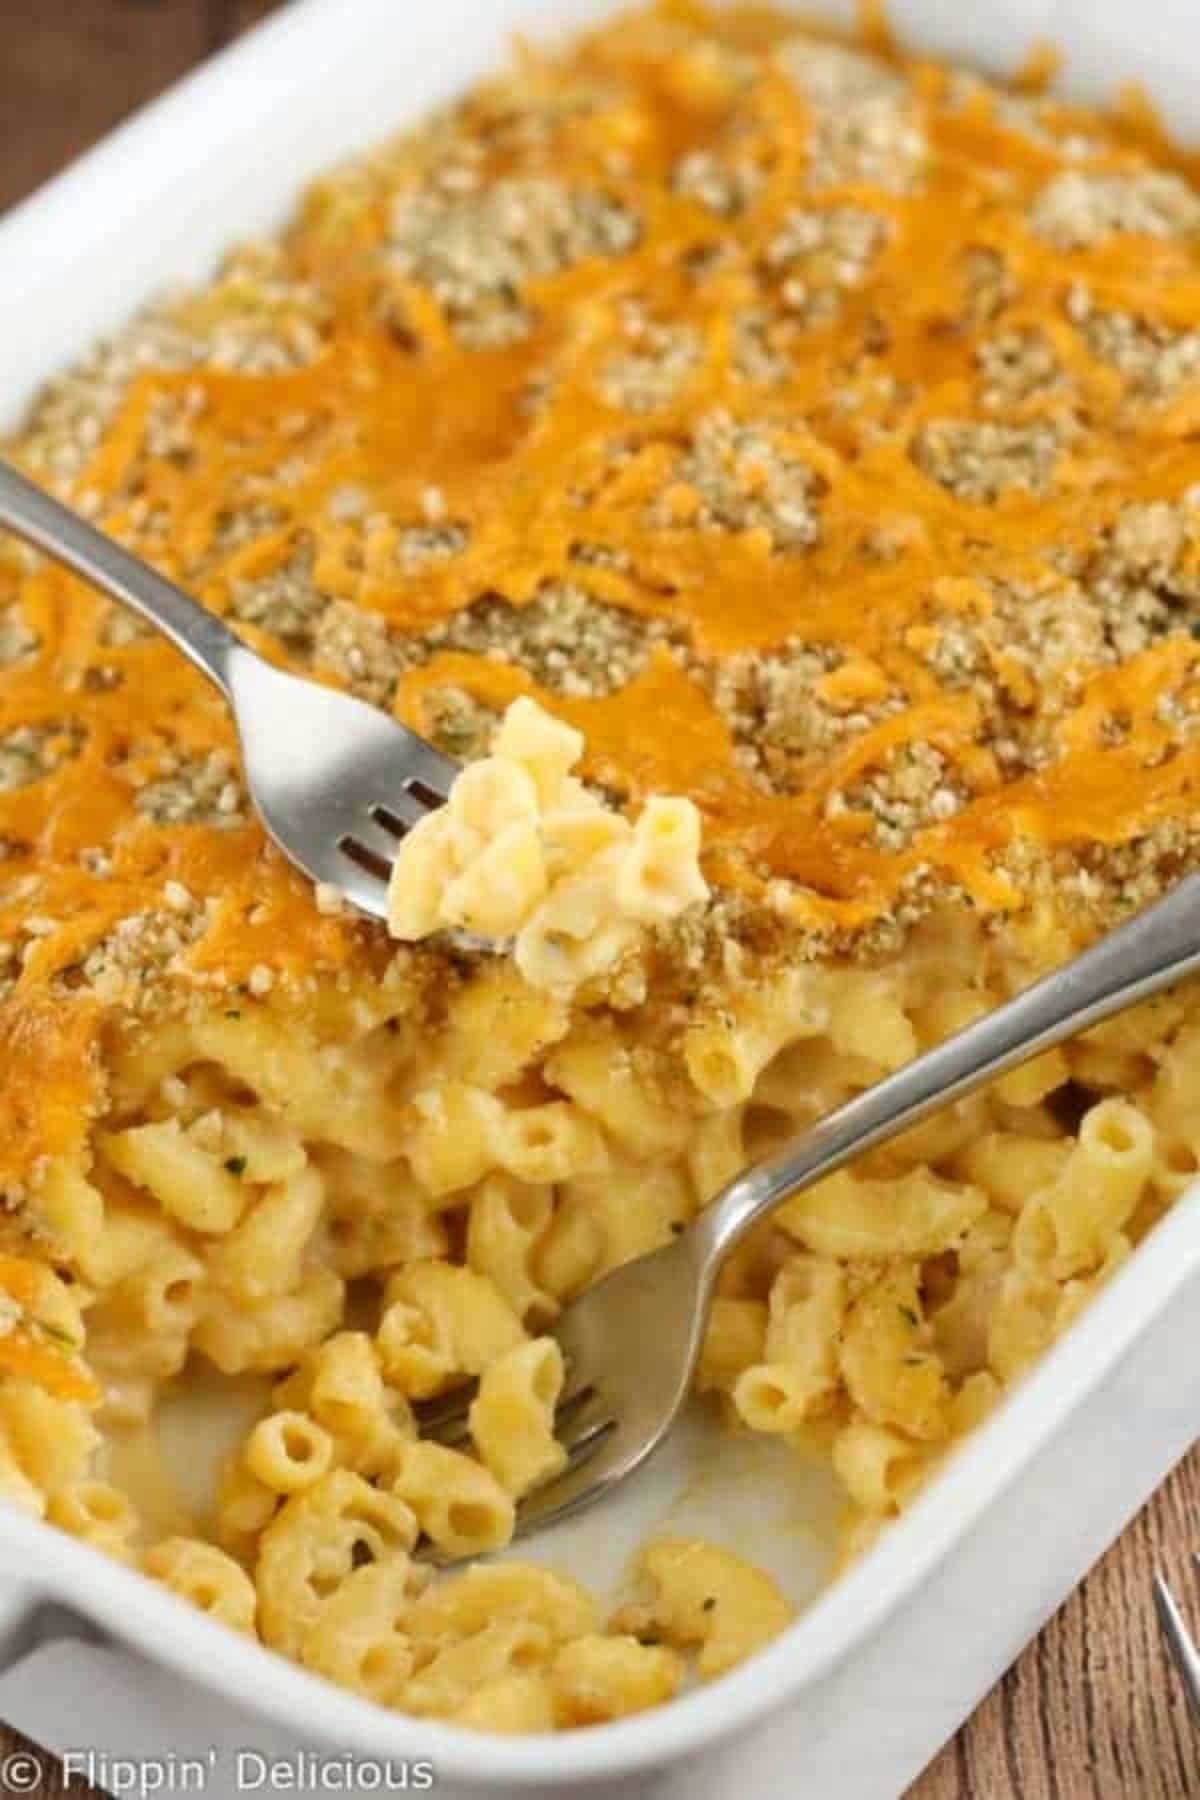 Scrumptious Baked Gluten-Free Mac and Cheese in a white casserole witth two spoons.